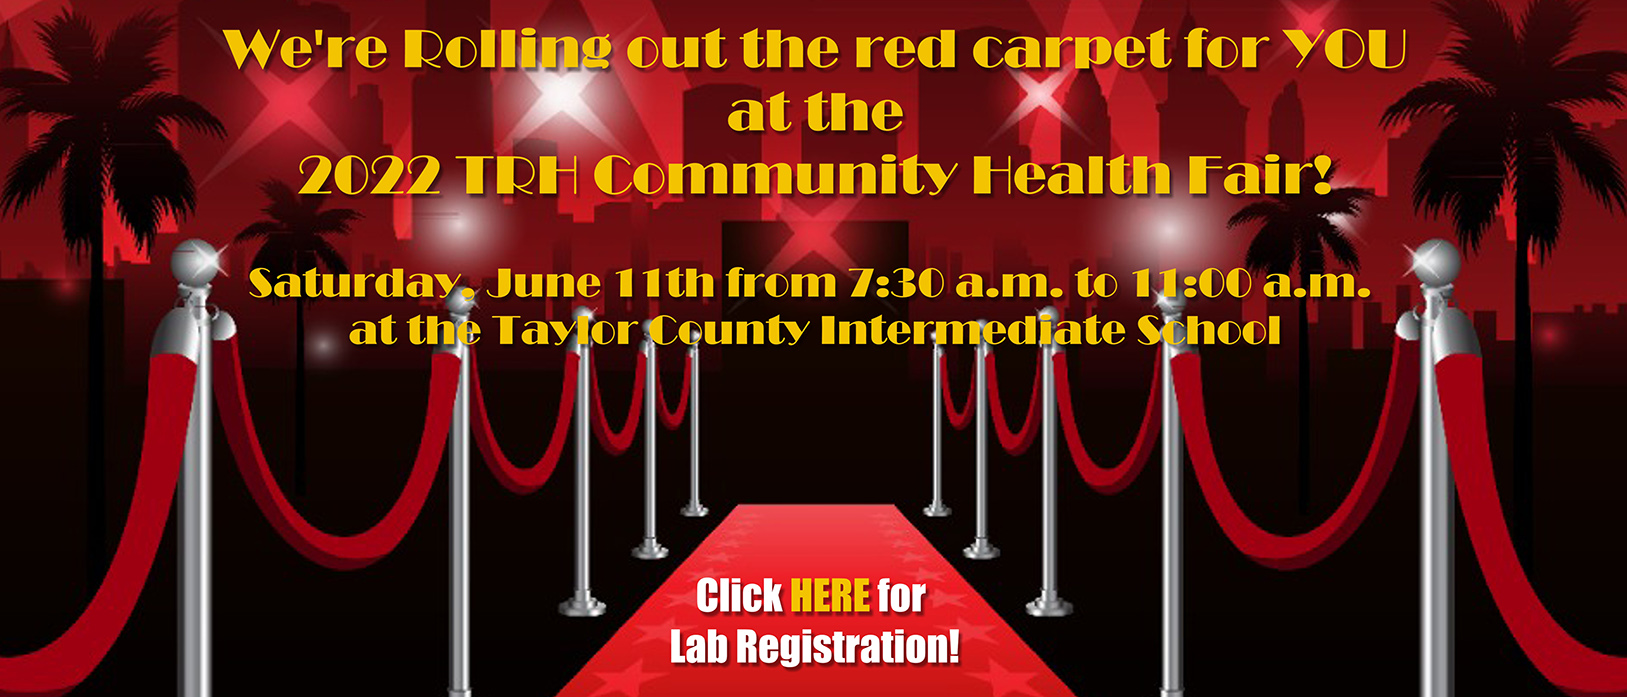 Banner that says:

We're Rolling out the red carpet for YOU at the 2022 TRH Community Health Fair!

Saturday, June 11th from 7:30 a.m. to 11:00 a.m. at the Taylor County Intermediate School


Click HERE for Lab Registration!